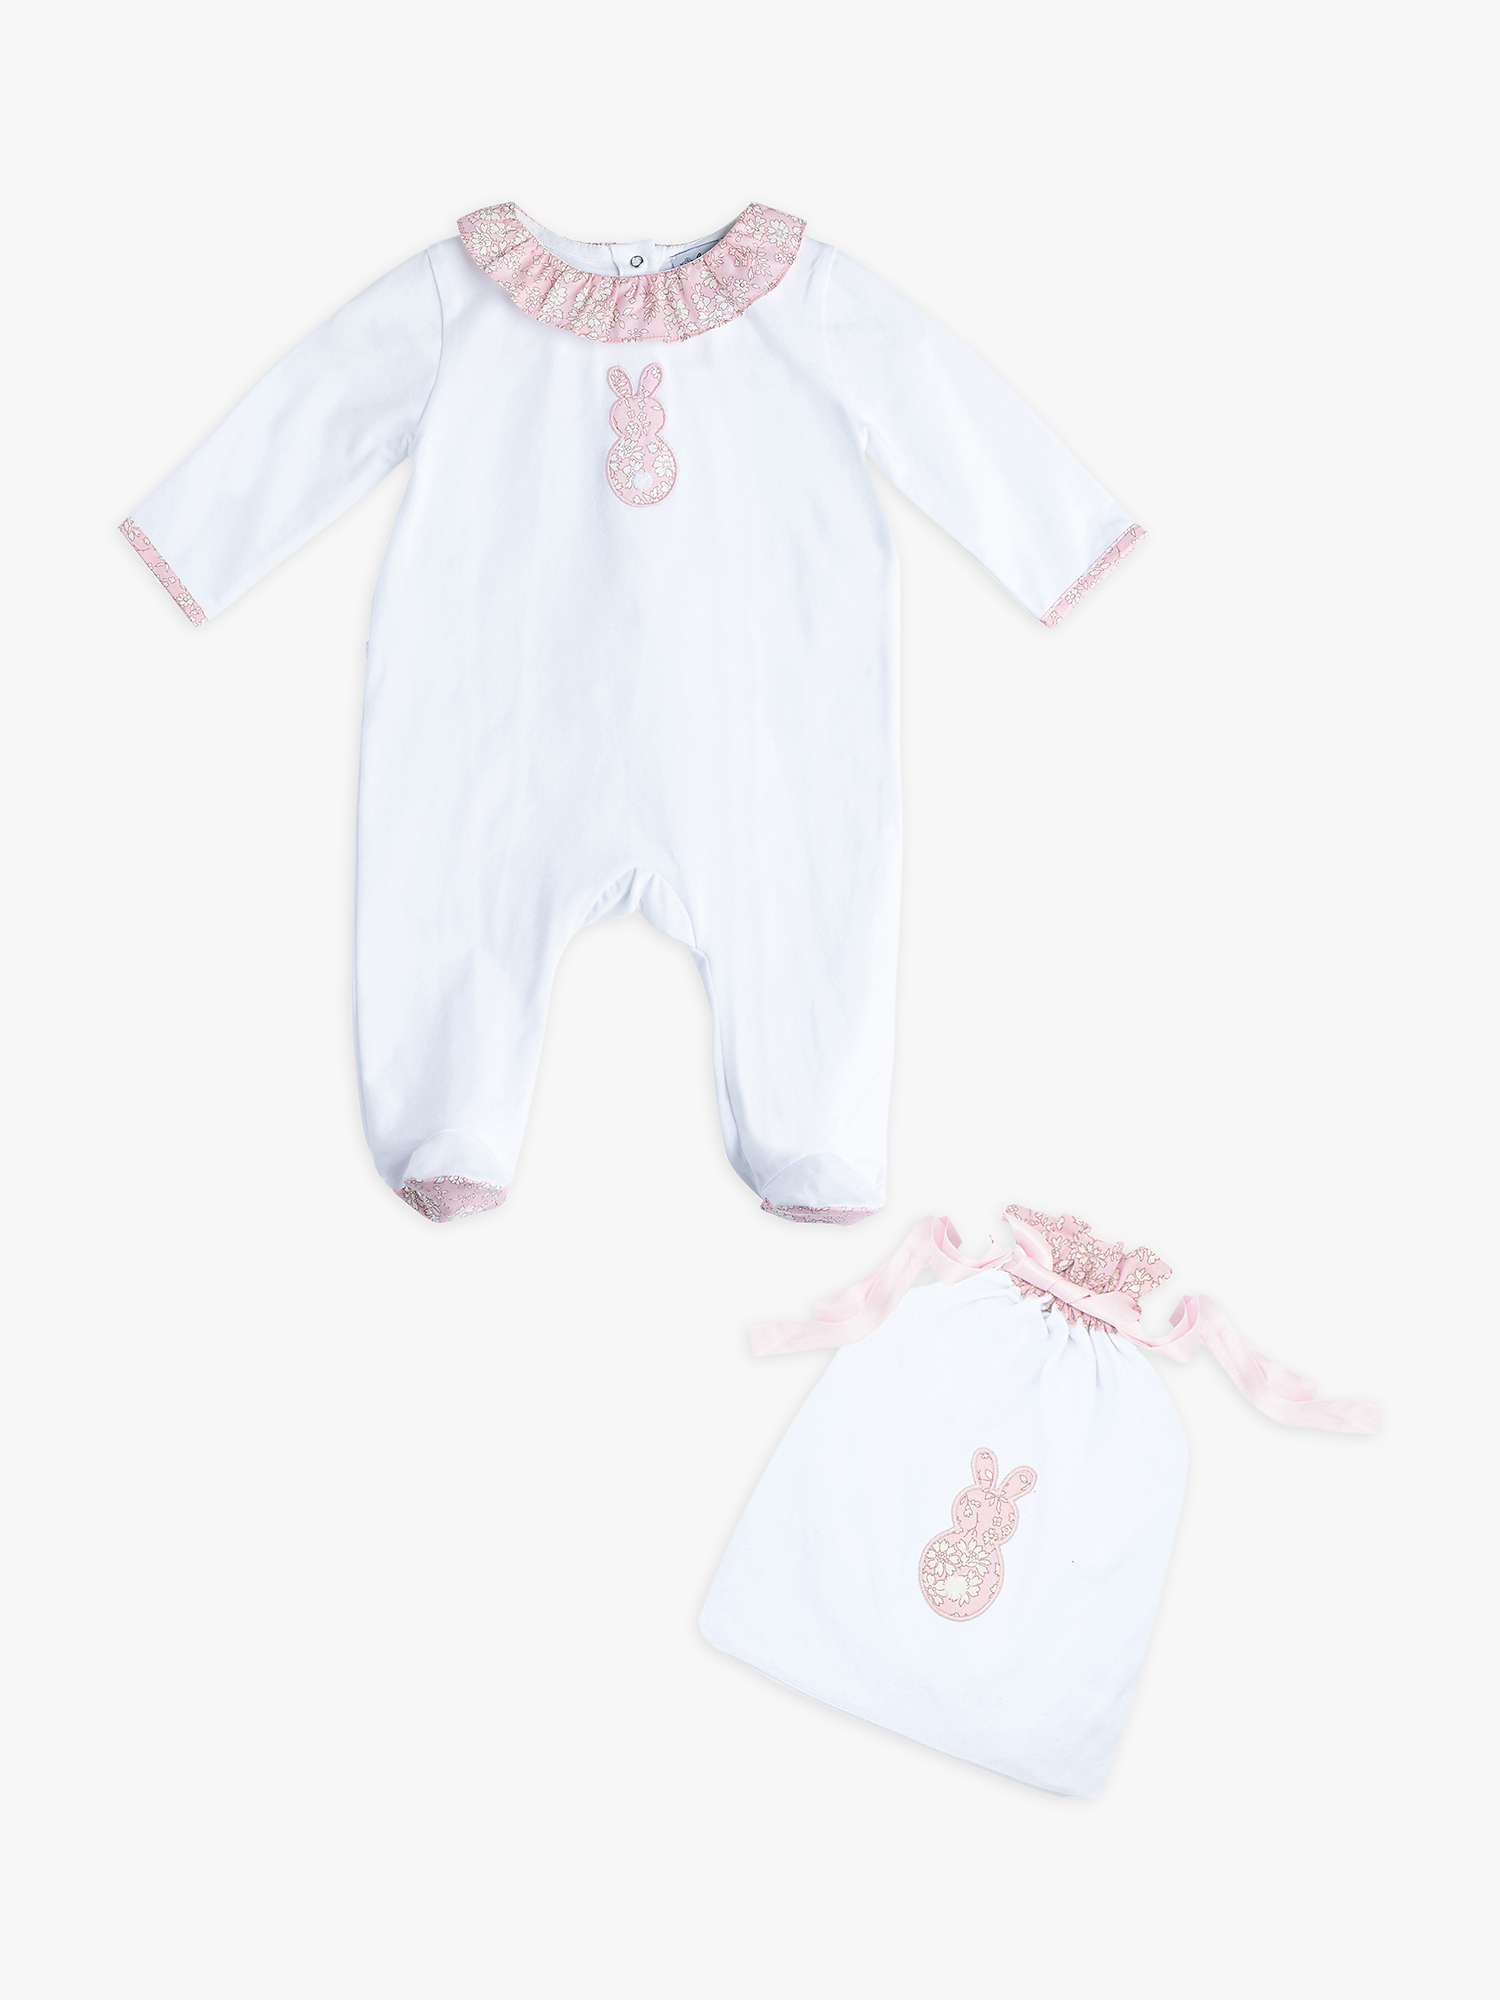 Buy Trotters Baby Capel Flopsy All-in-One and Gift Bag Set, White/Pink Online at johnlewis.com